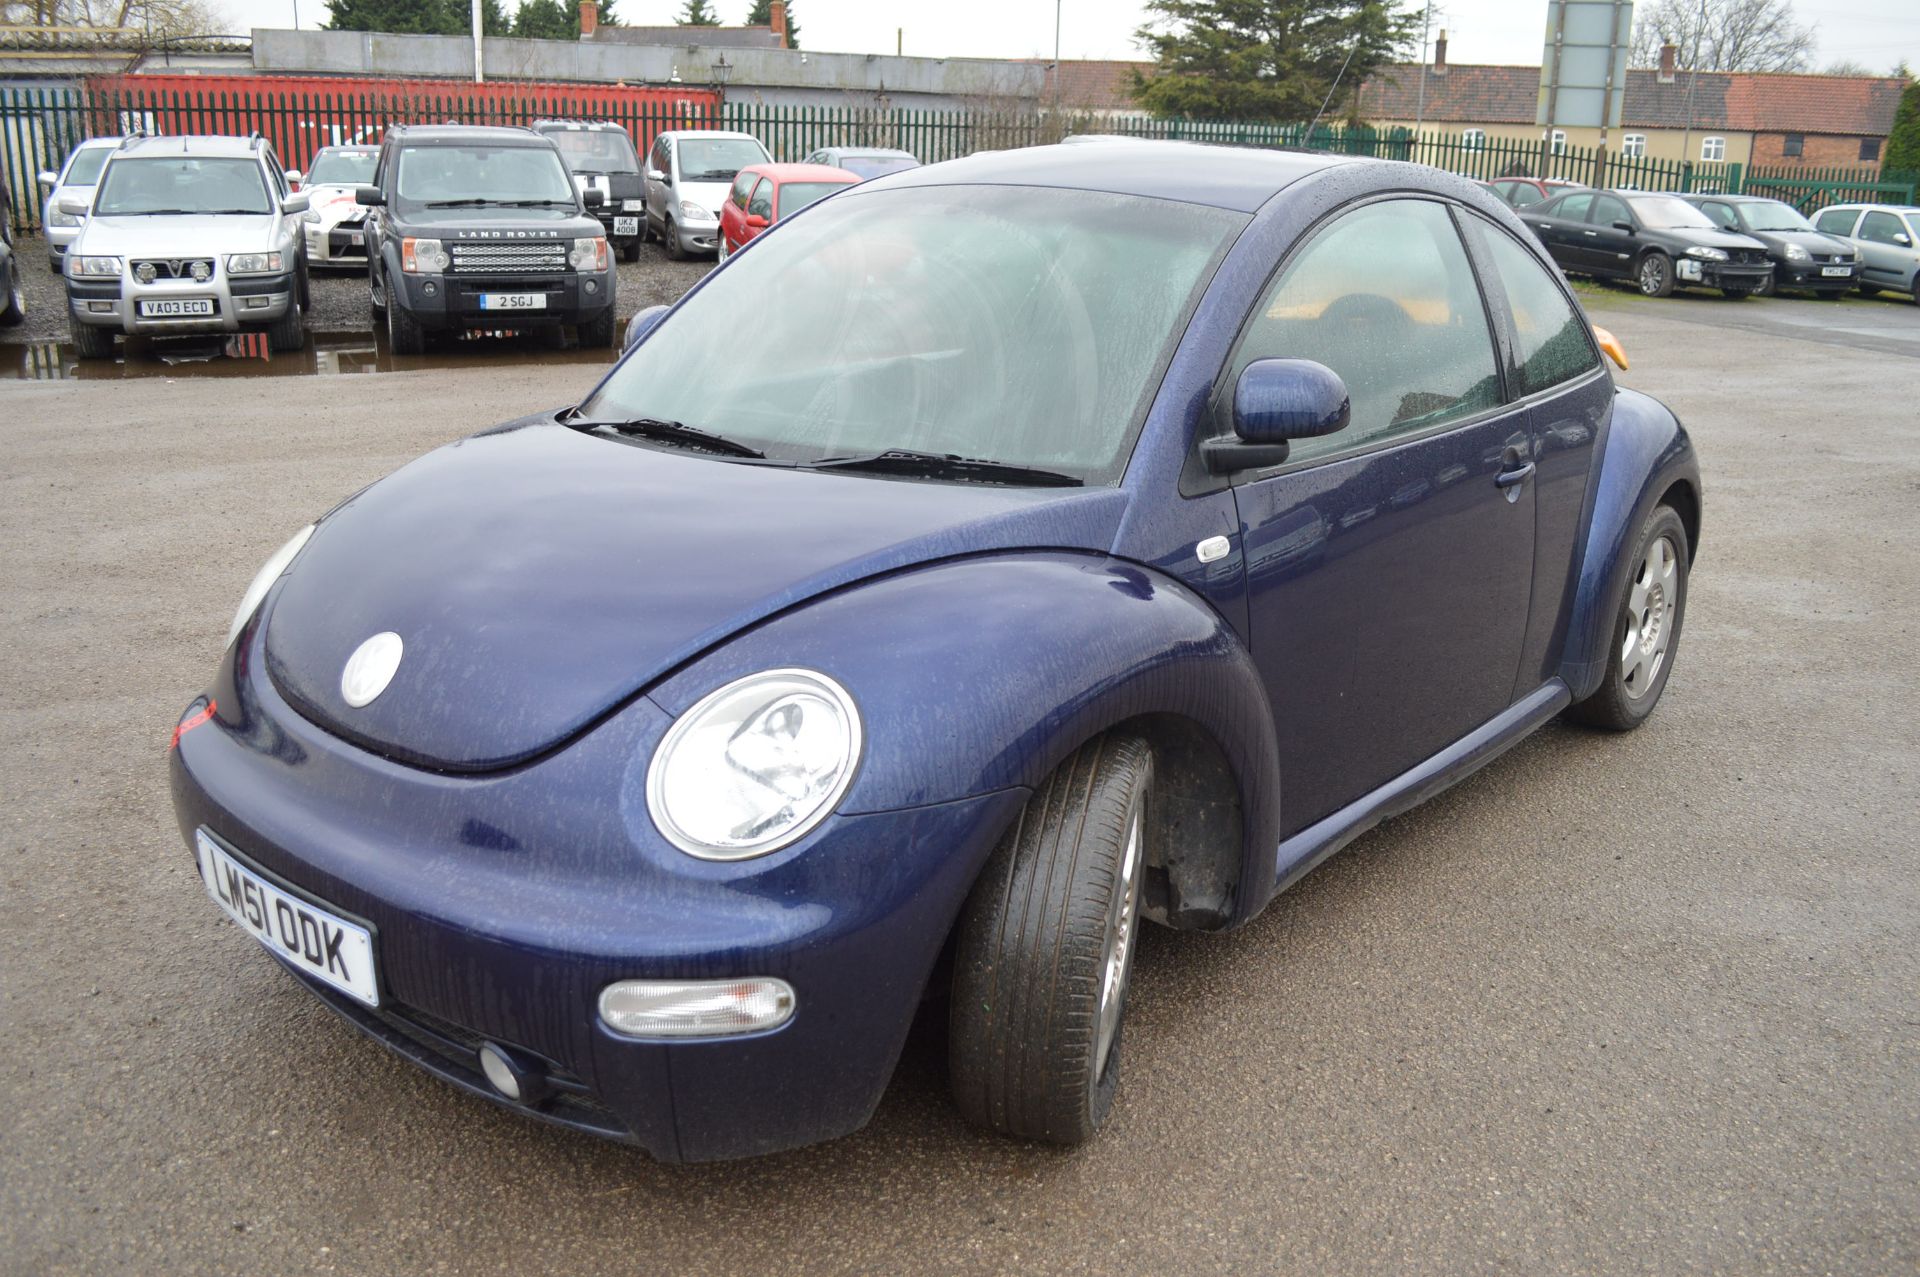 2001/51 REG VOLKSWAGEN BEETLE TURBO 1.8 TRACK CAR 5 SPEED MANUAL GOOD STRONG ENGINE AND BOX HAS JUST - Image 3 of 15